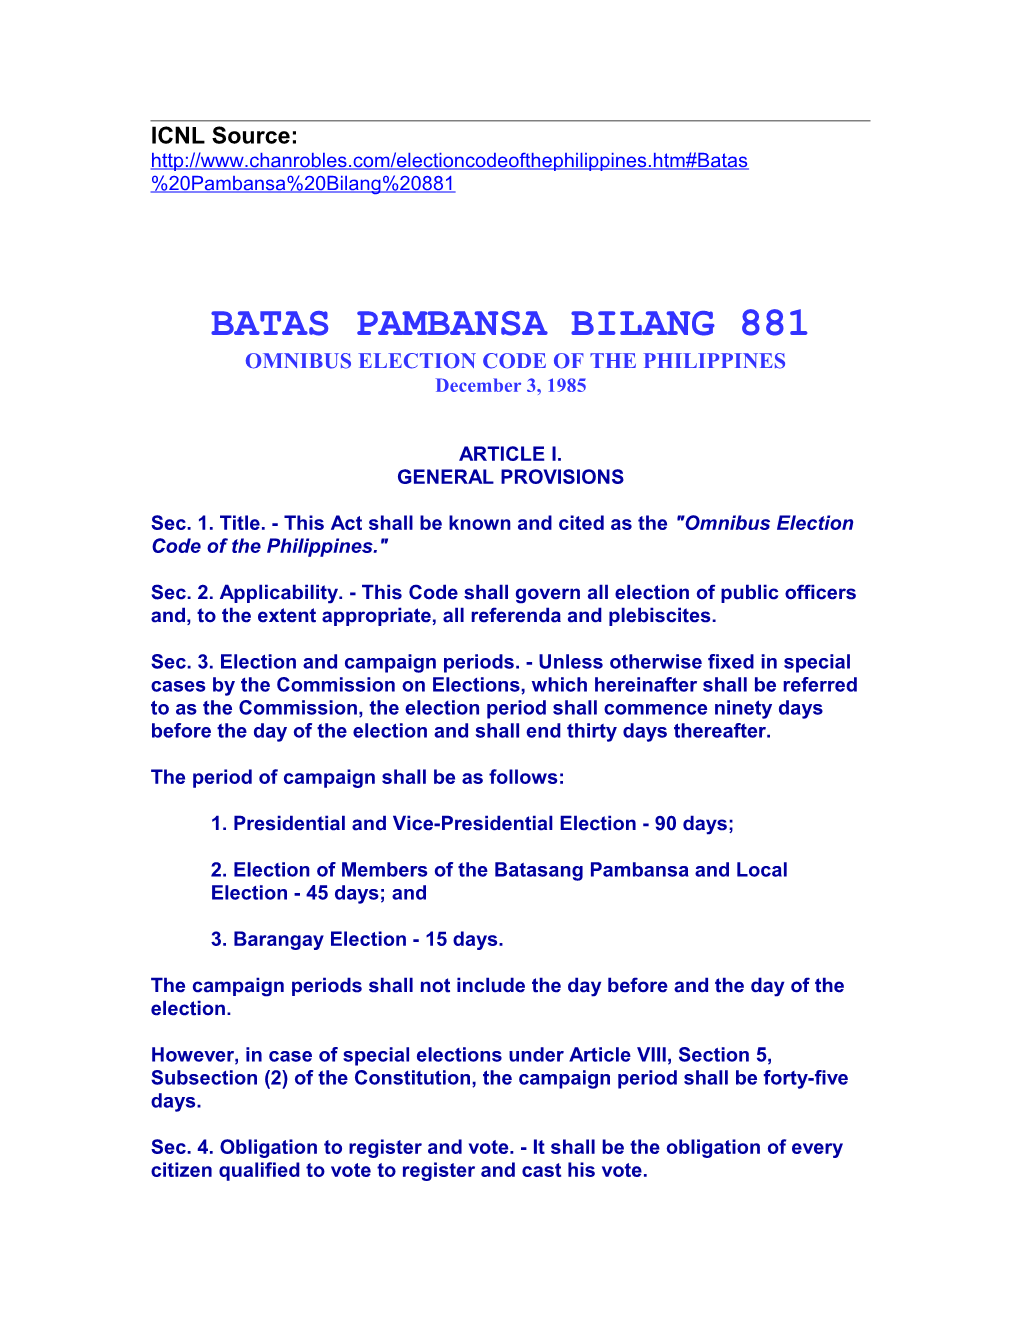 Omnibus Election Code of the Philippines